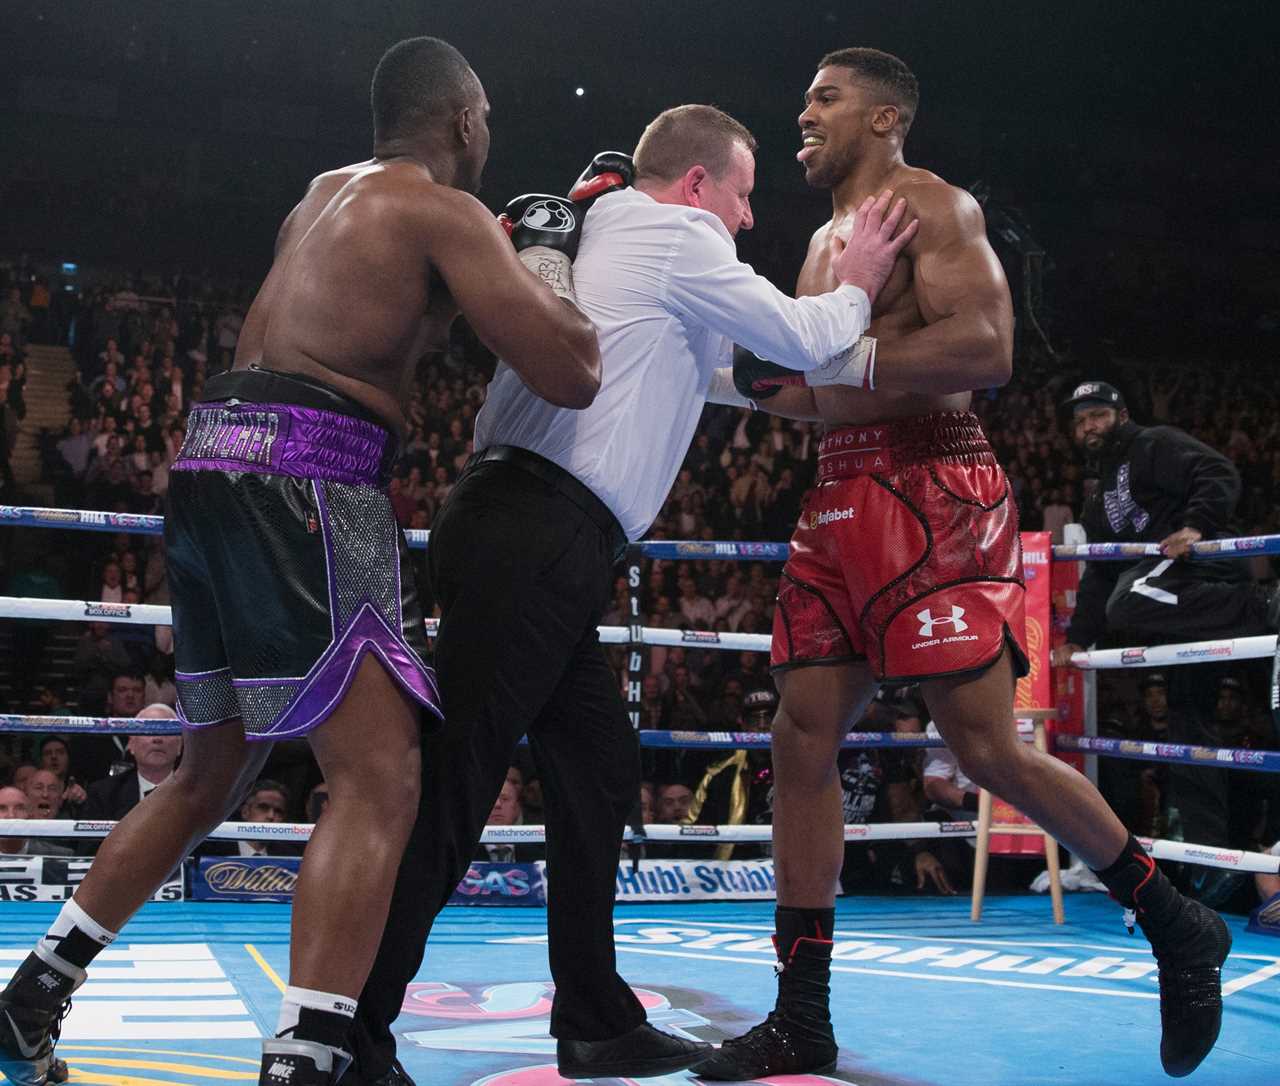 Eddie Hearn offers Dillian Whatte a rematch against Anthony Joshua after the pair continues to feud over social media